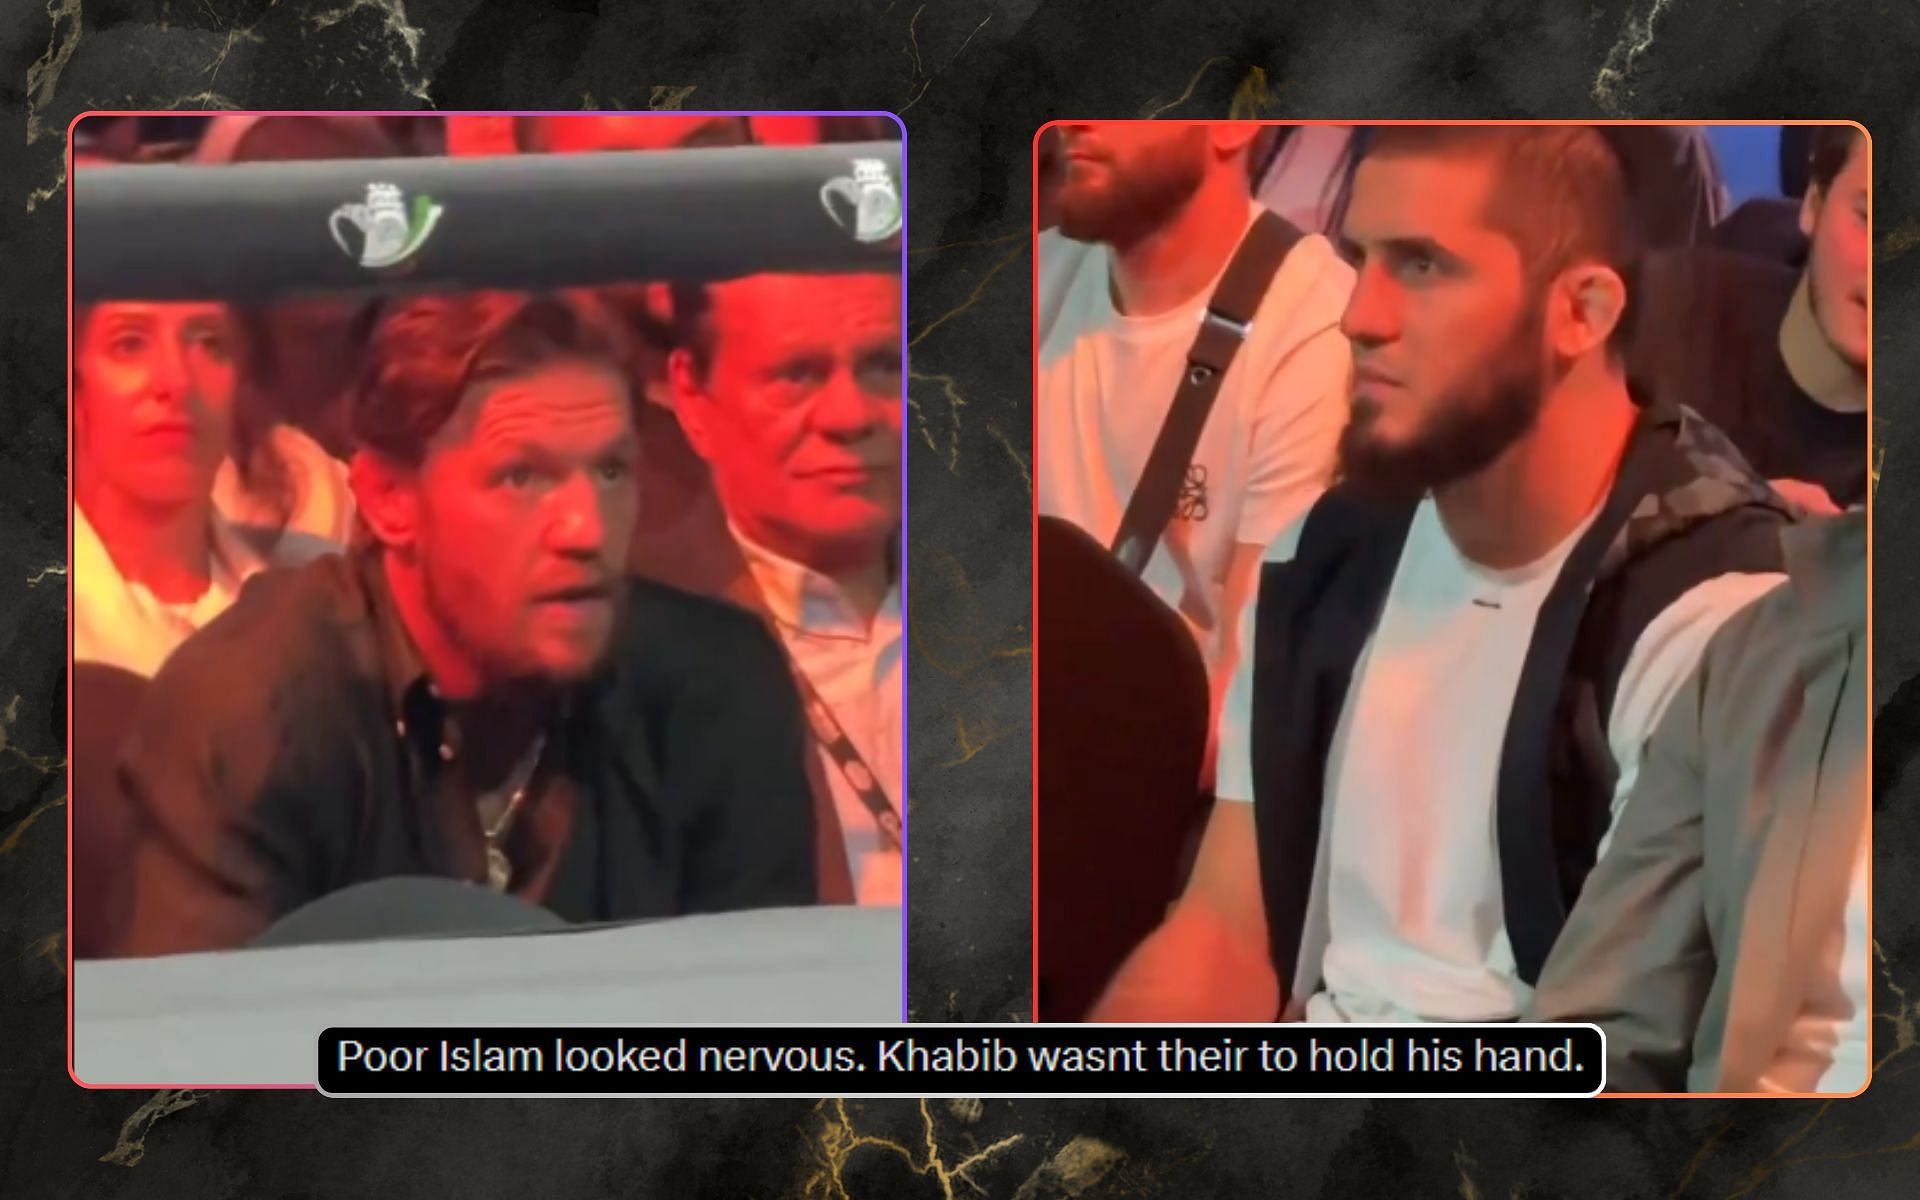 Conor McGregor and Islam Makhachev seated at a boxing event in Dubai